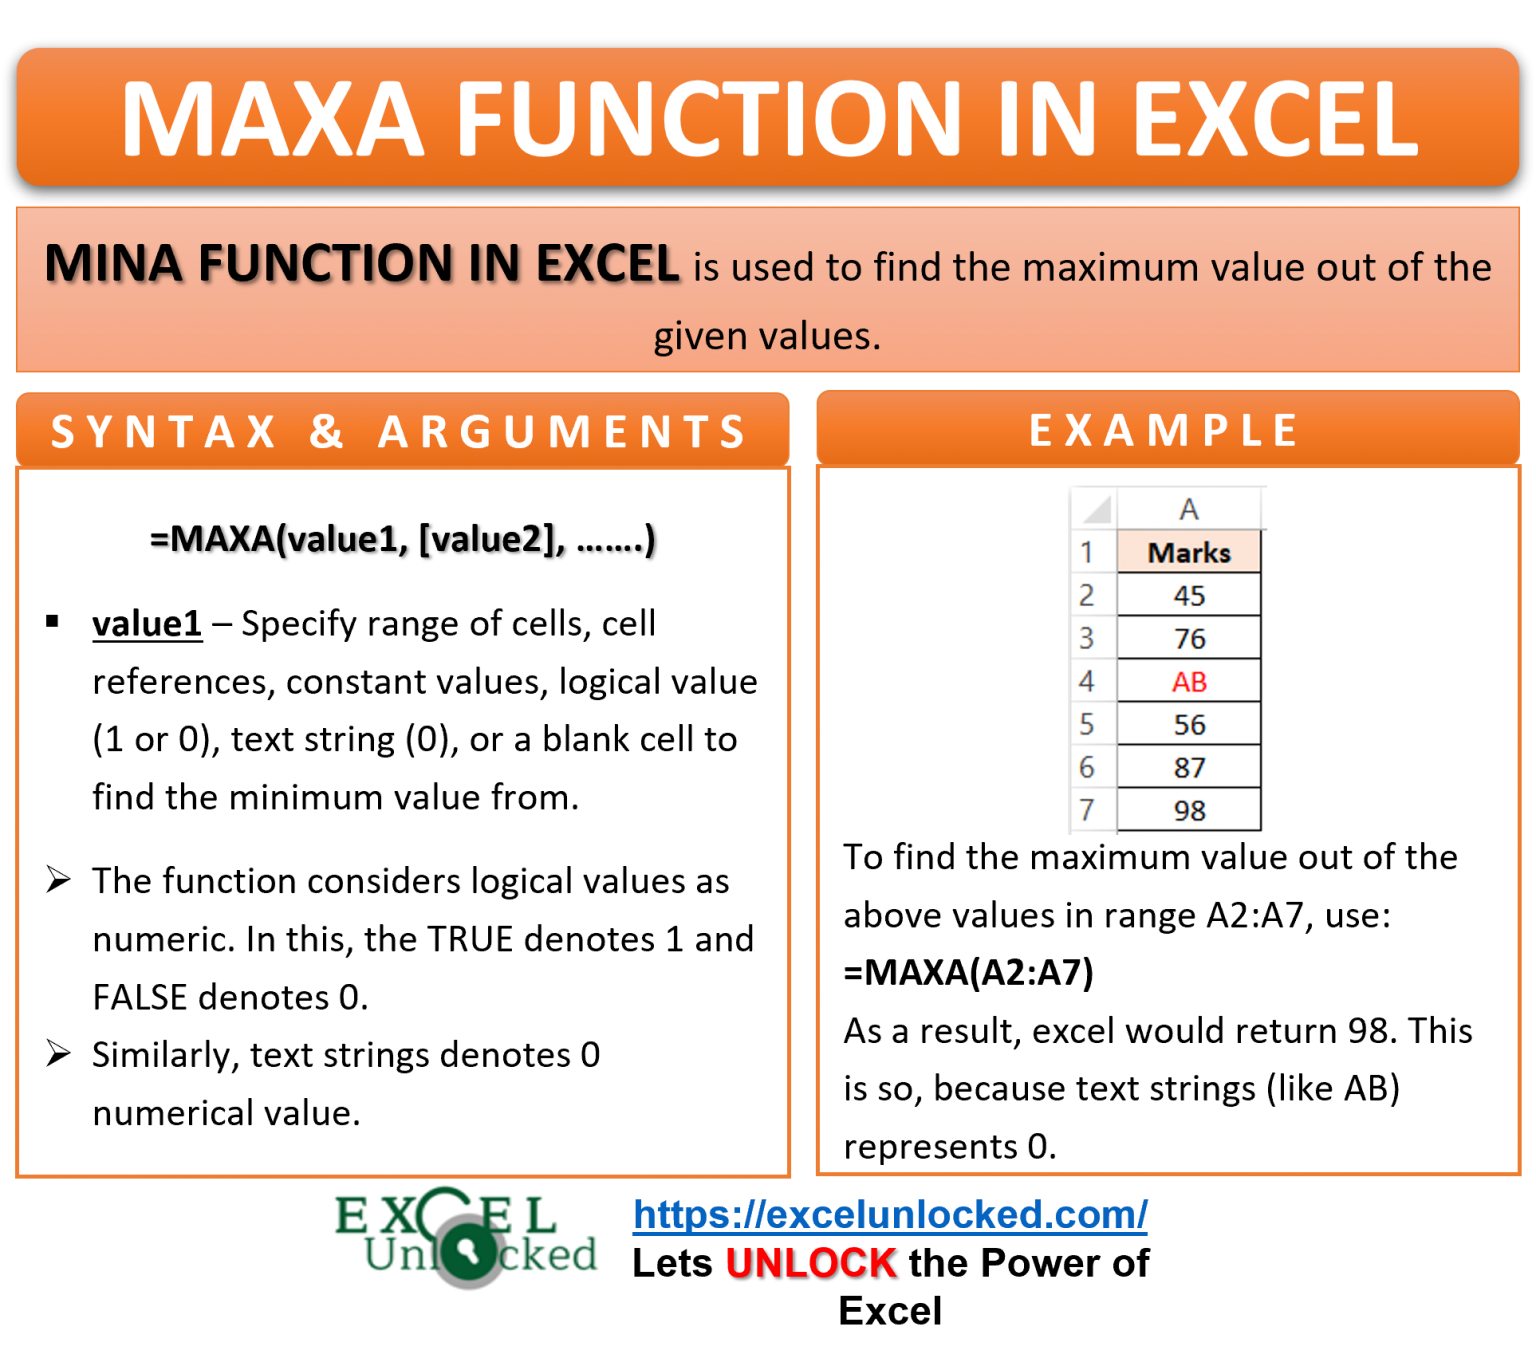 maxa-function-in-excel-finding-maximum-value-from-range